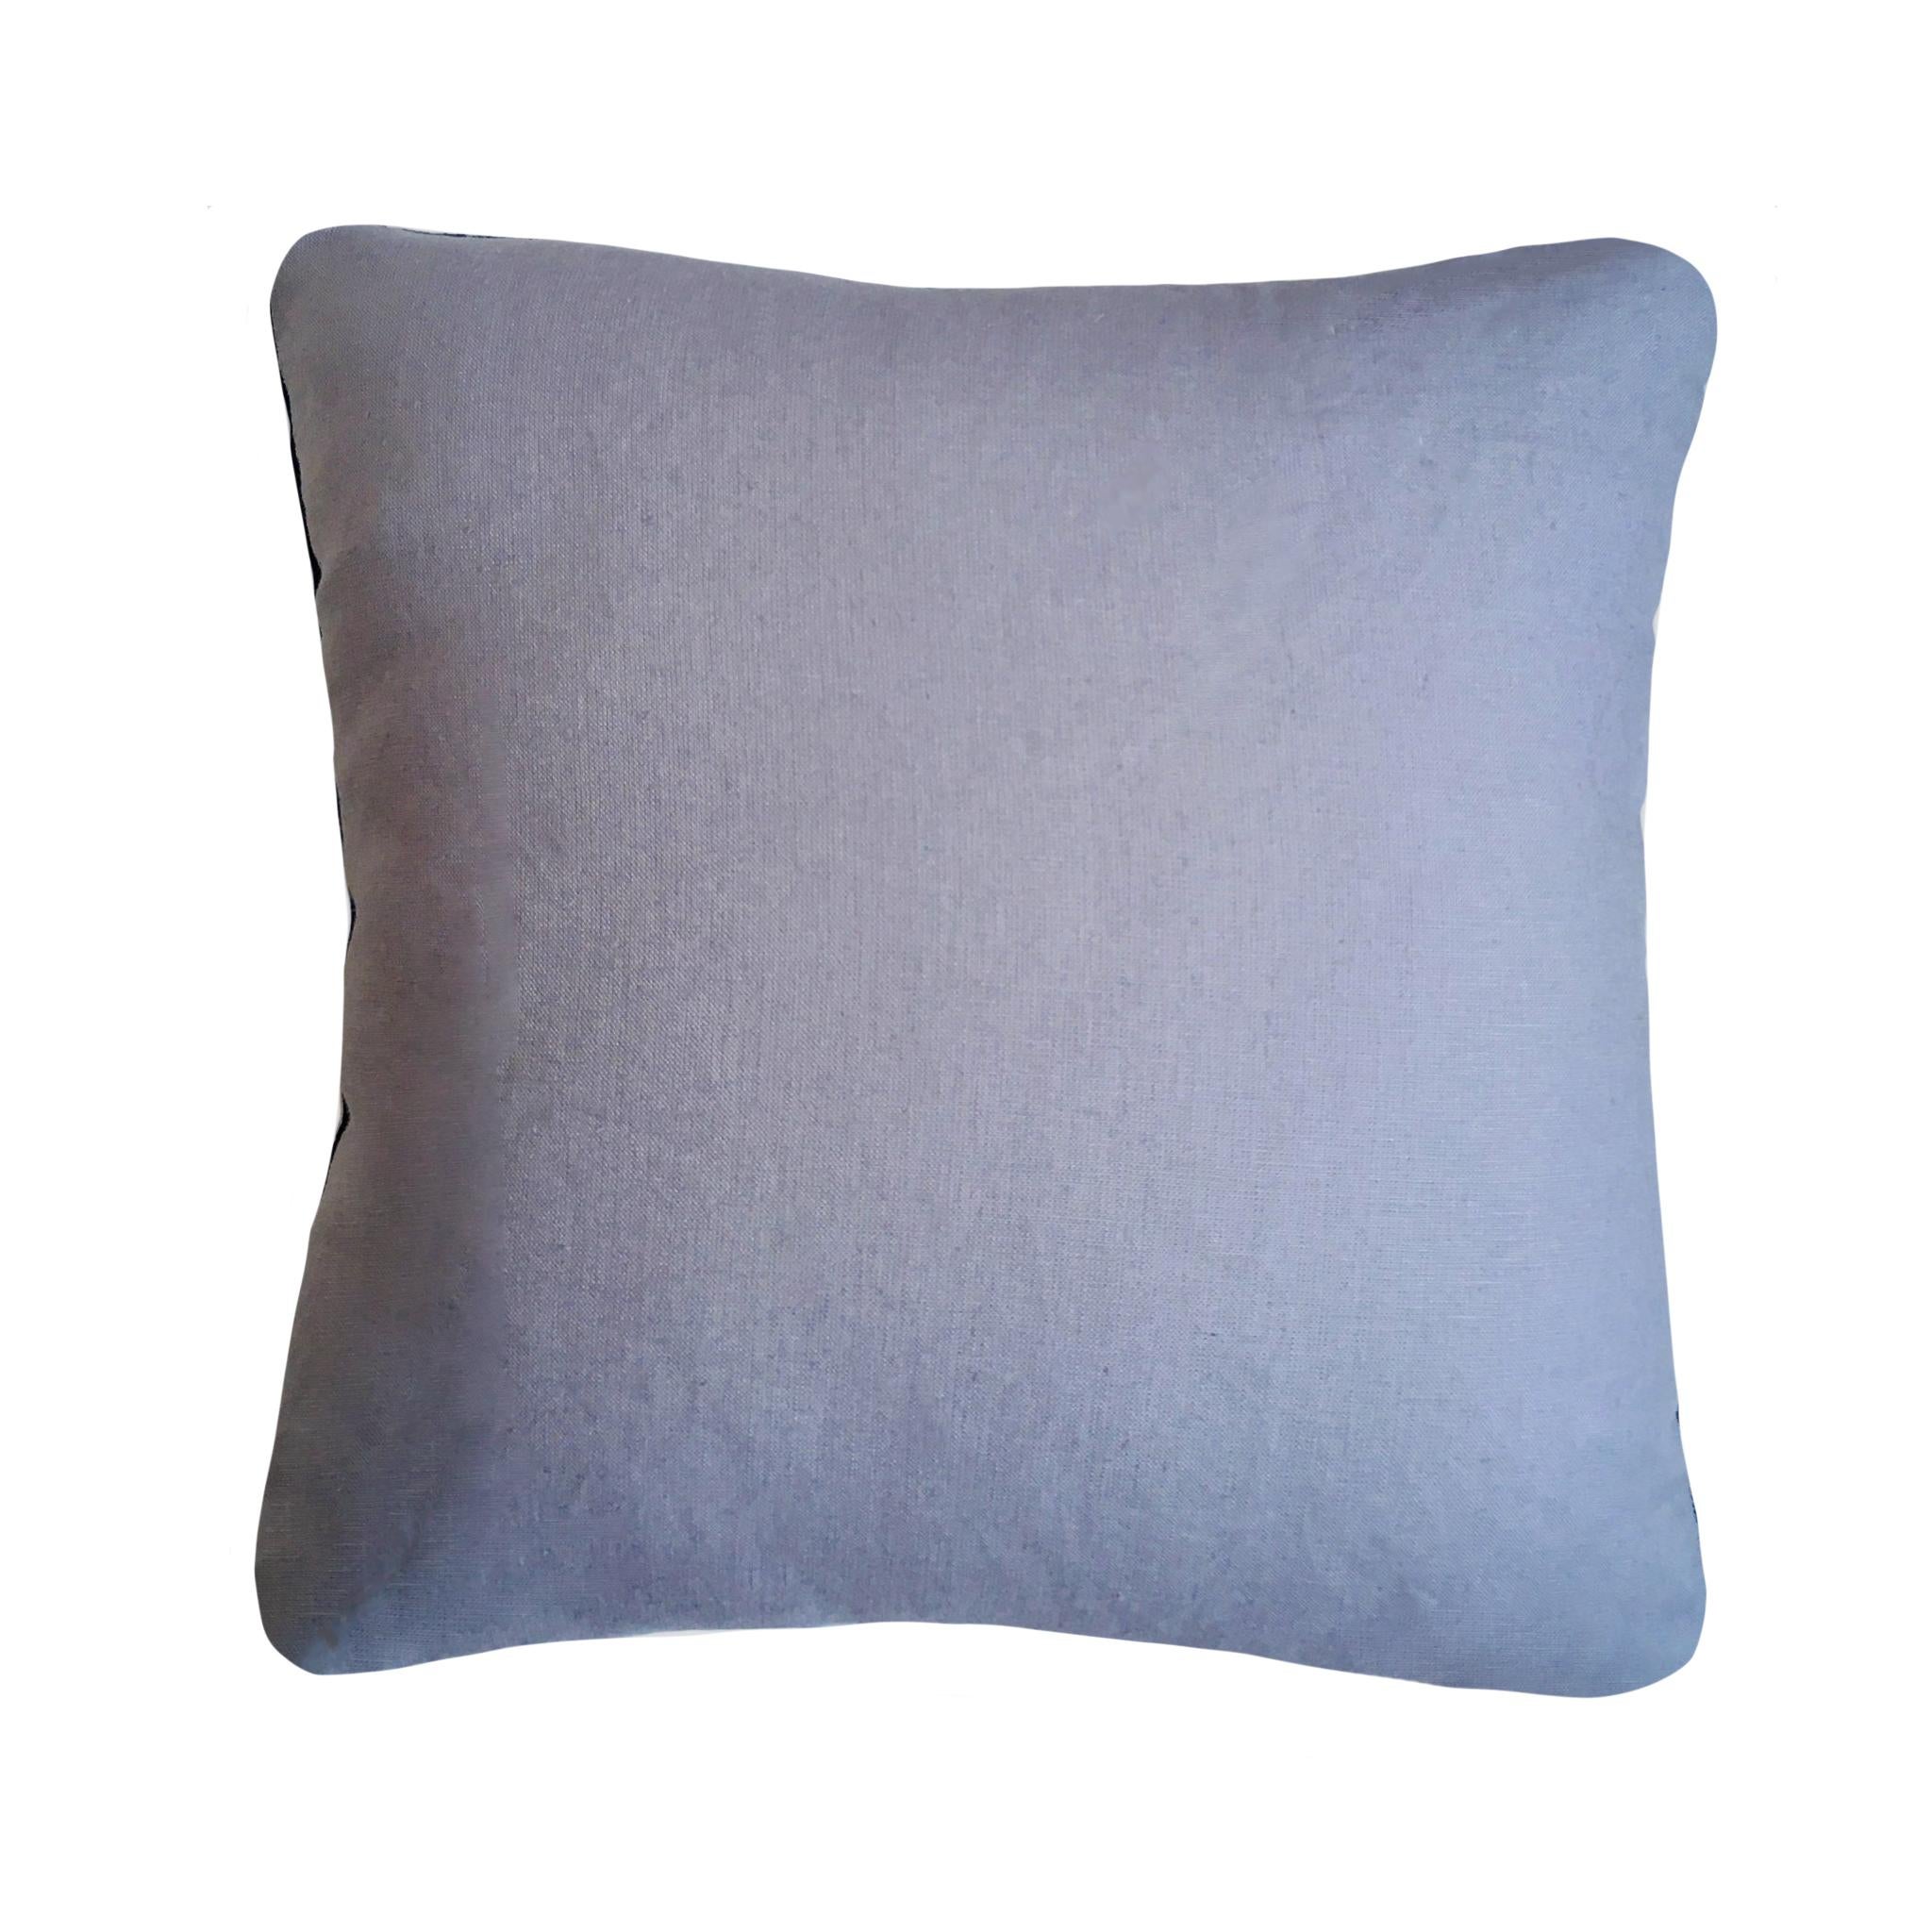 Rose velvet cushion dyed with indigo in Pleat pattern with grey linen backing, invisible zip closure at bottom.

Hand-dyed and sewn in New York City.

Pillow measures 18 x 18 inches, down pillow insert made locally in Brooklyn. 

Each velvet cushion